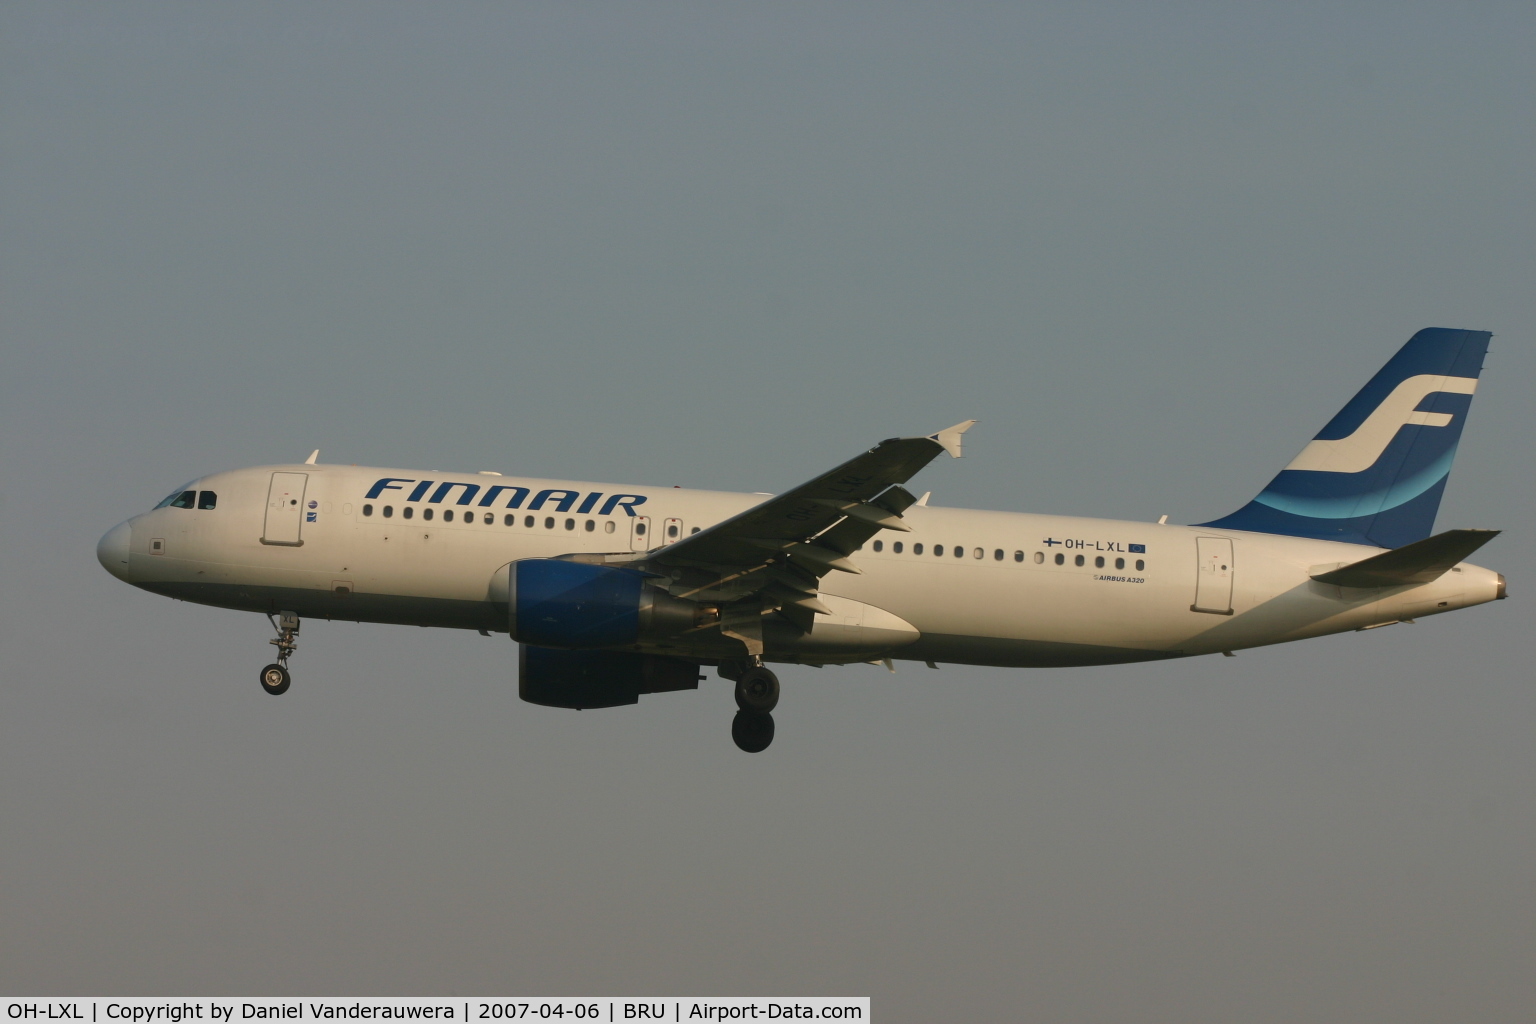 OH-LXL, 2003 Airbus A320-214 C/N 2146, arrival of flight AY811 on rwy 25L